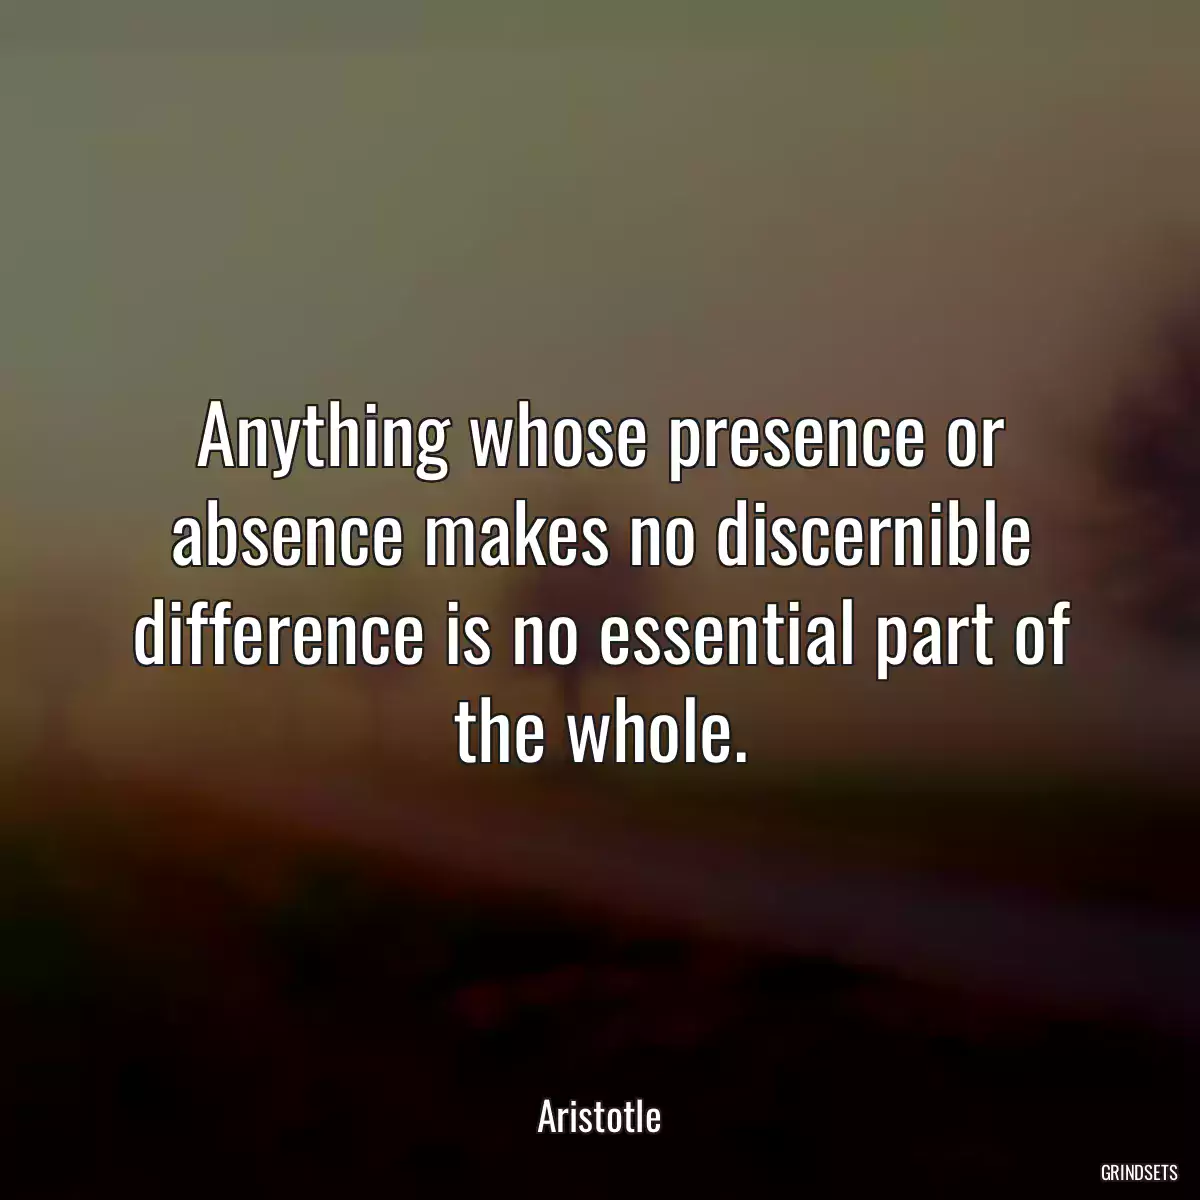 Anything whose presence or absence makes no discernible difference is no essential part of the whole.